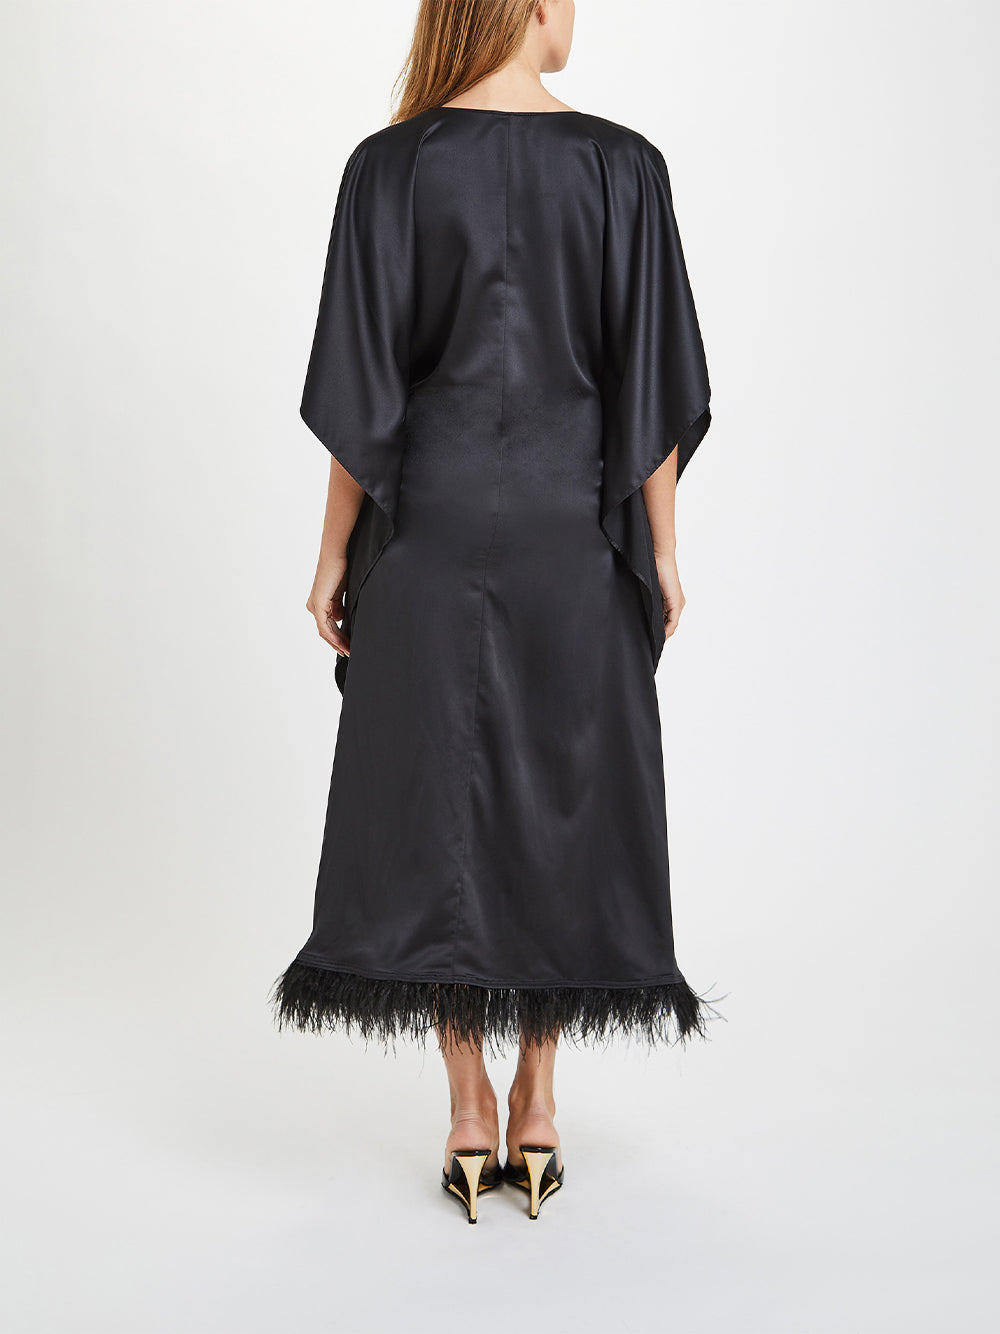 Black Satin with Black Ostrich Feather Caftan